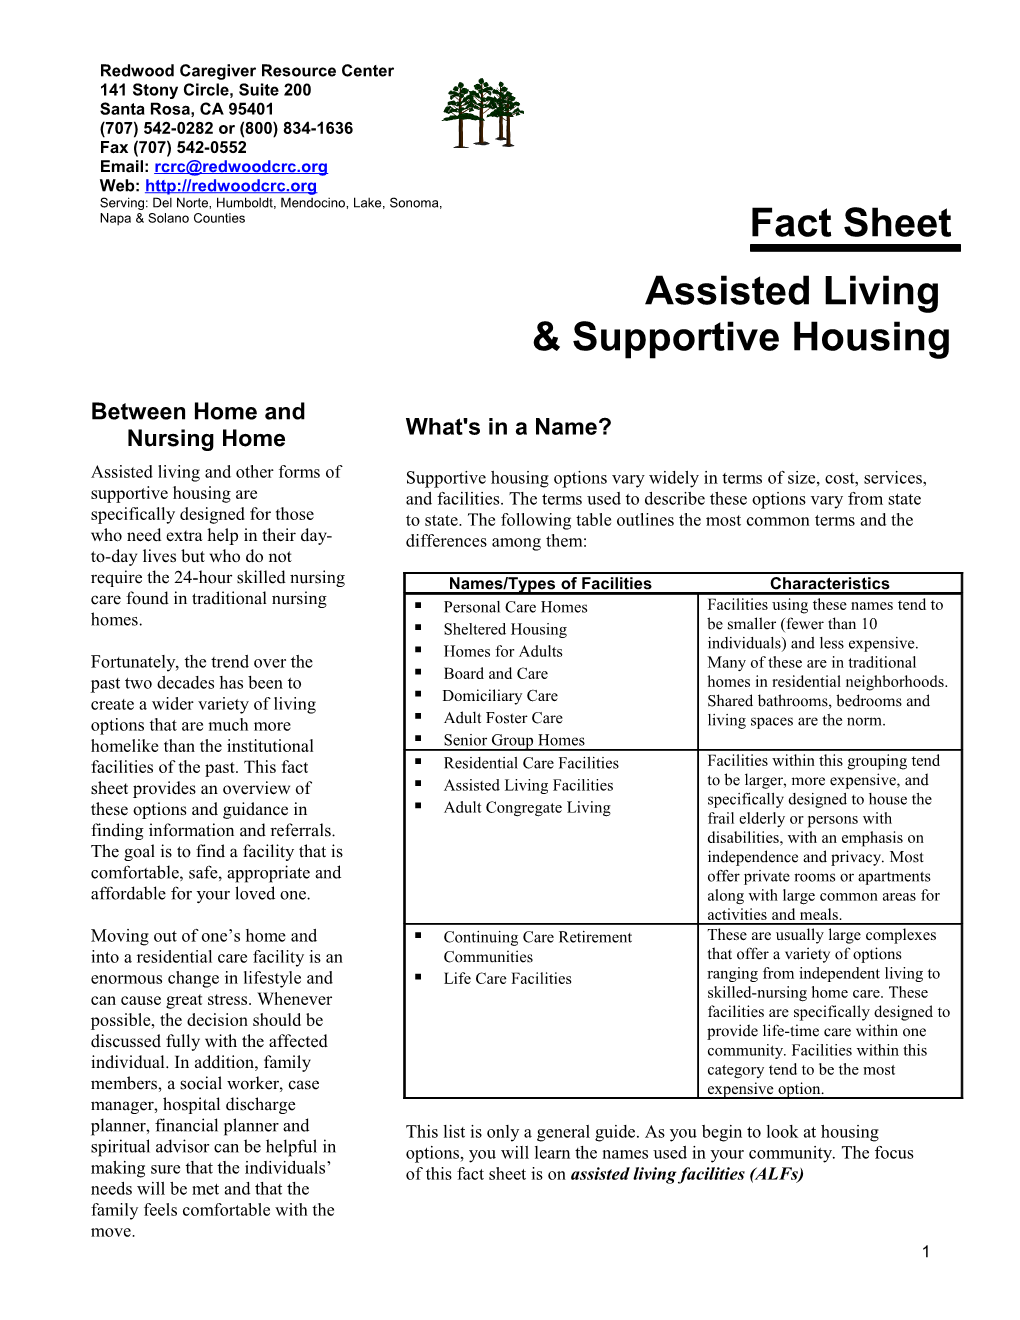 Assisted Living & Supportive Housing